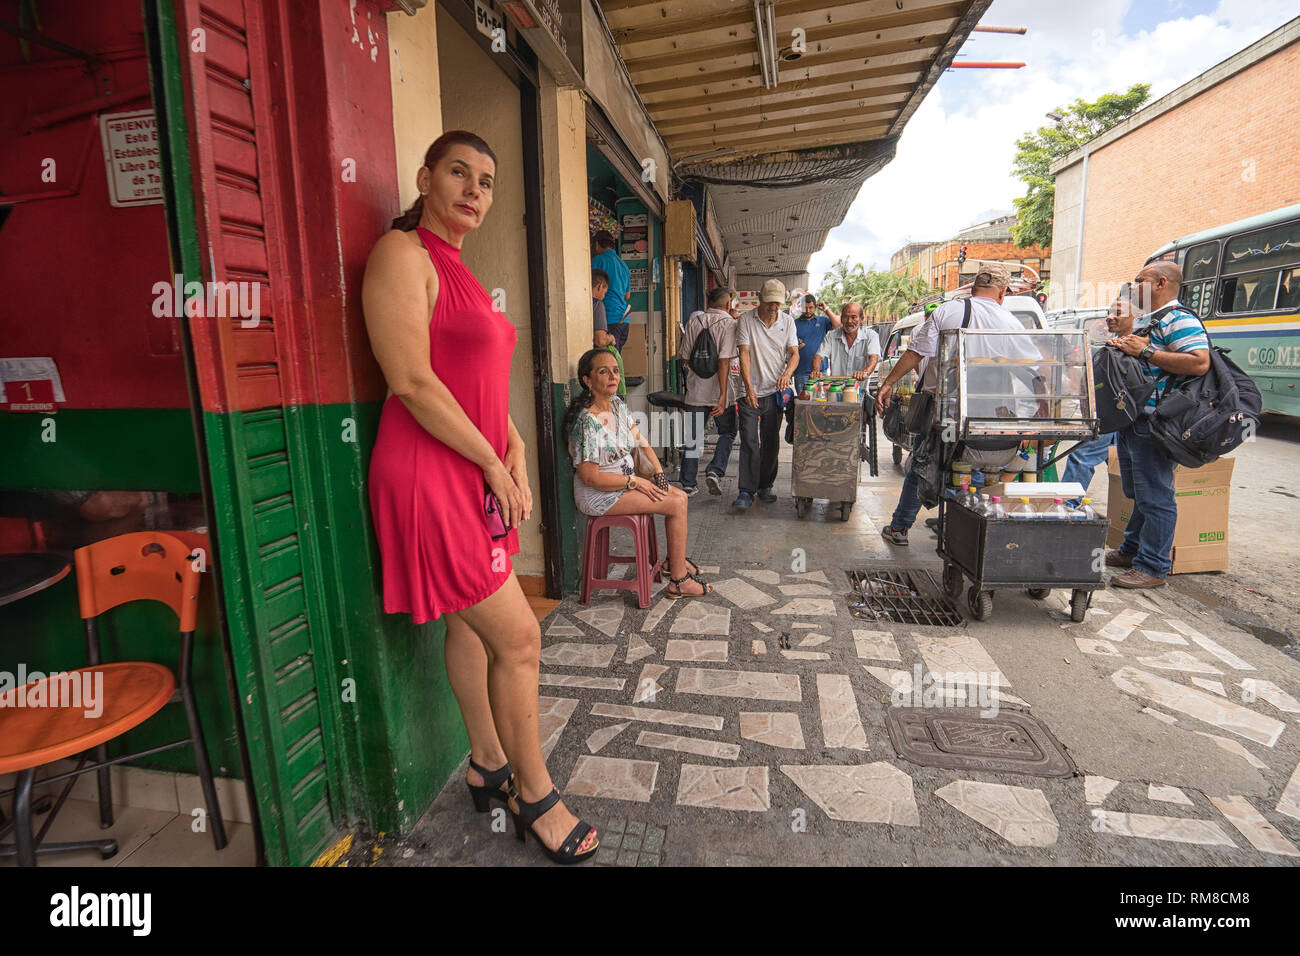 Medellin, Colombia - July 27, 2018:people on the street in the La Candelaria red light district Stock Photo